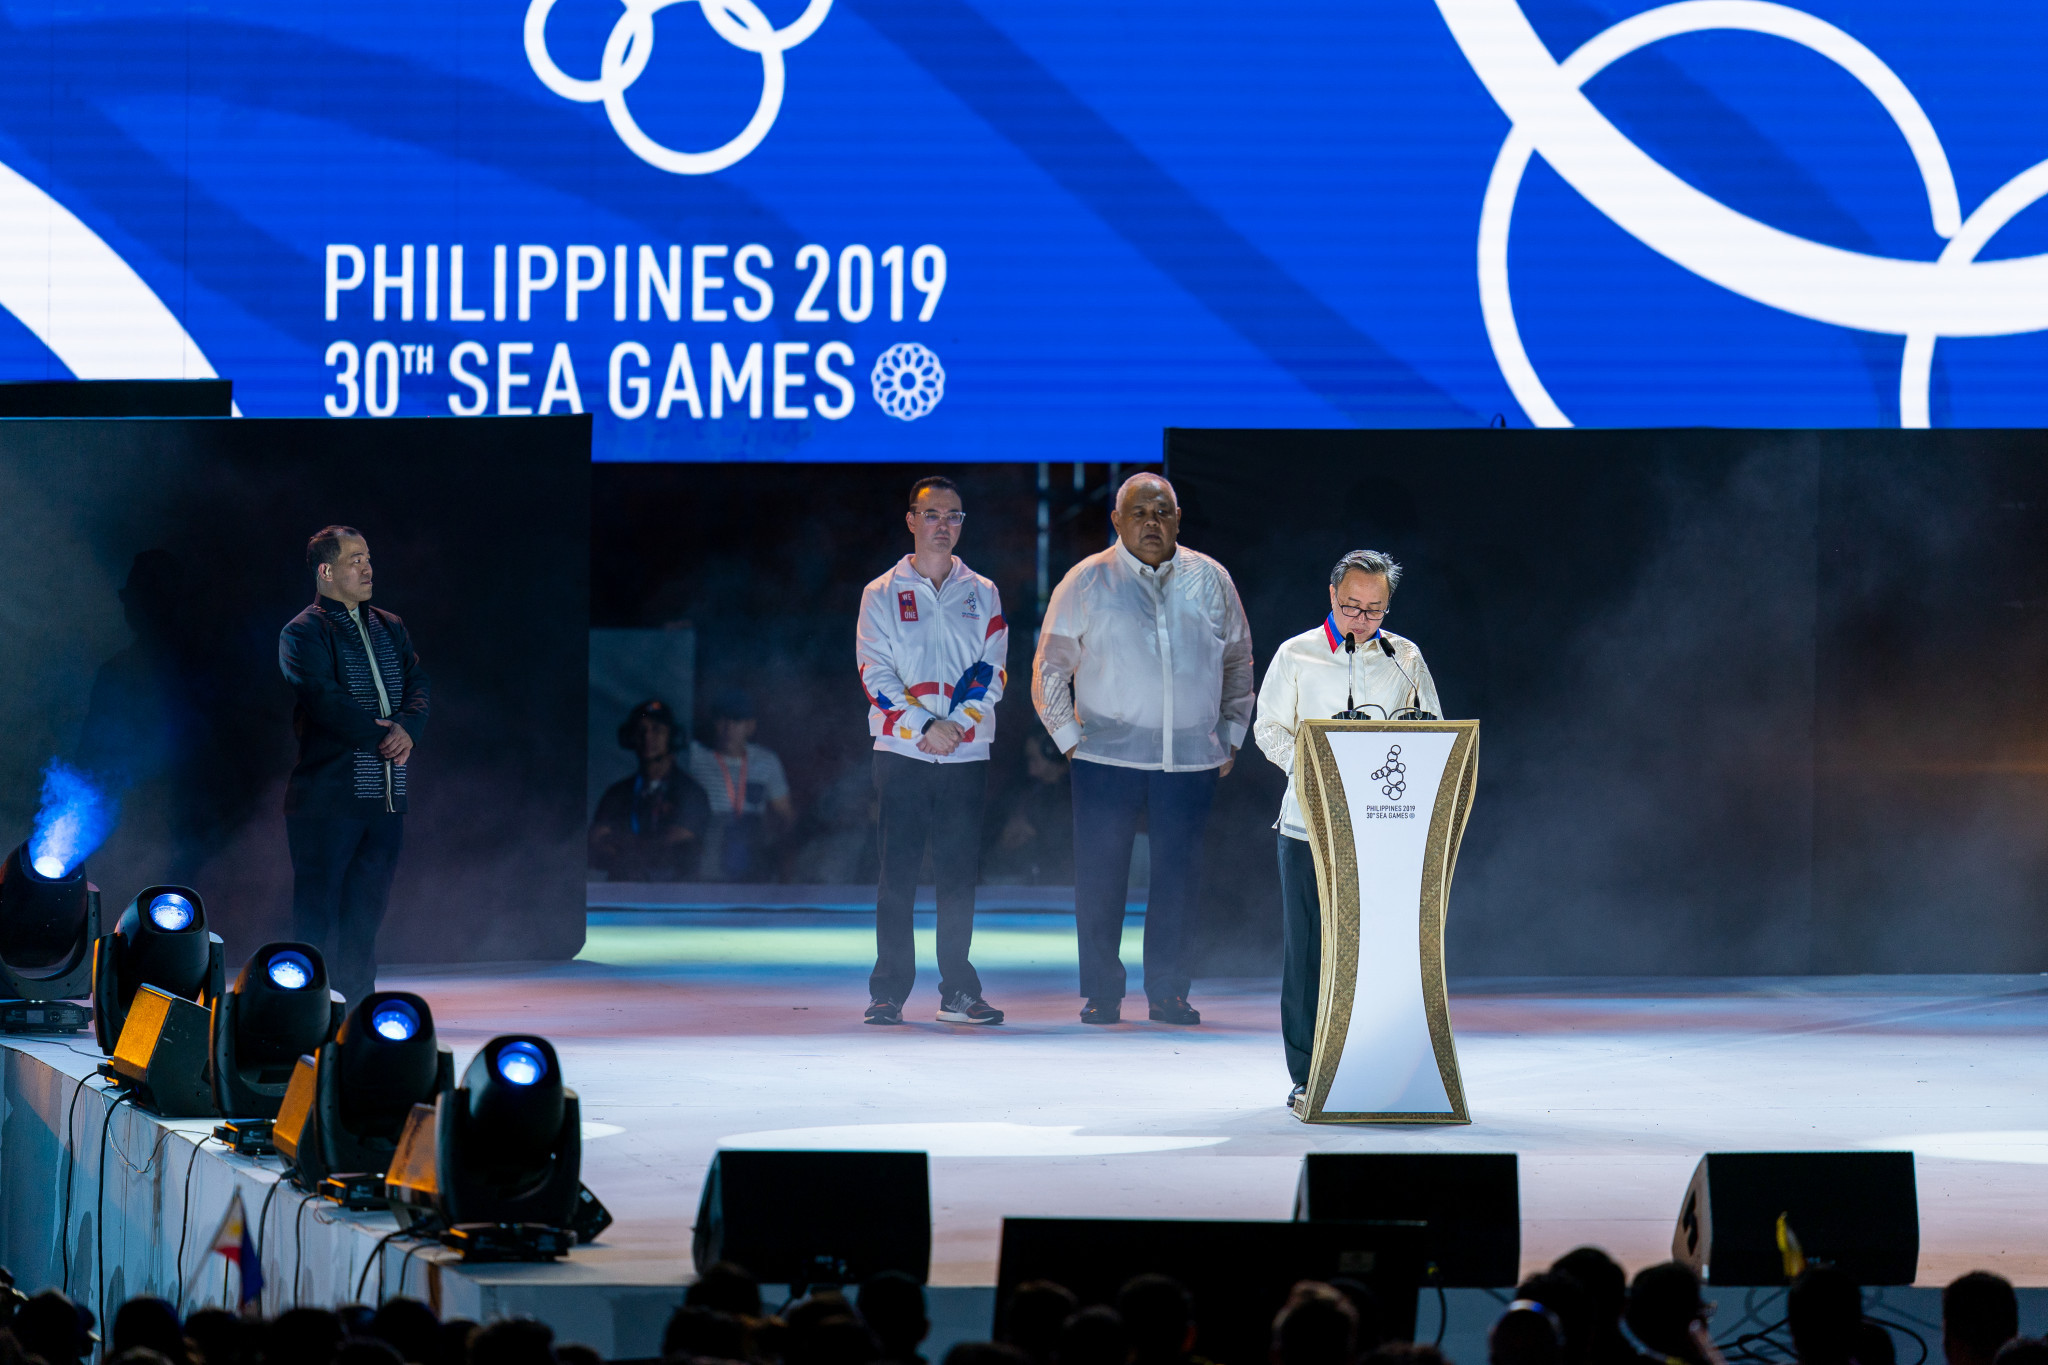 Abraham Tolentino was re-elected President of the Philippines Olympic Committee after defeating Clint Aranas by eight votes ©Getty Images